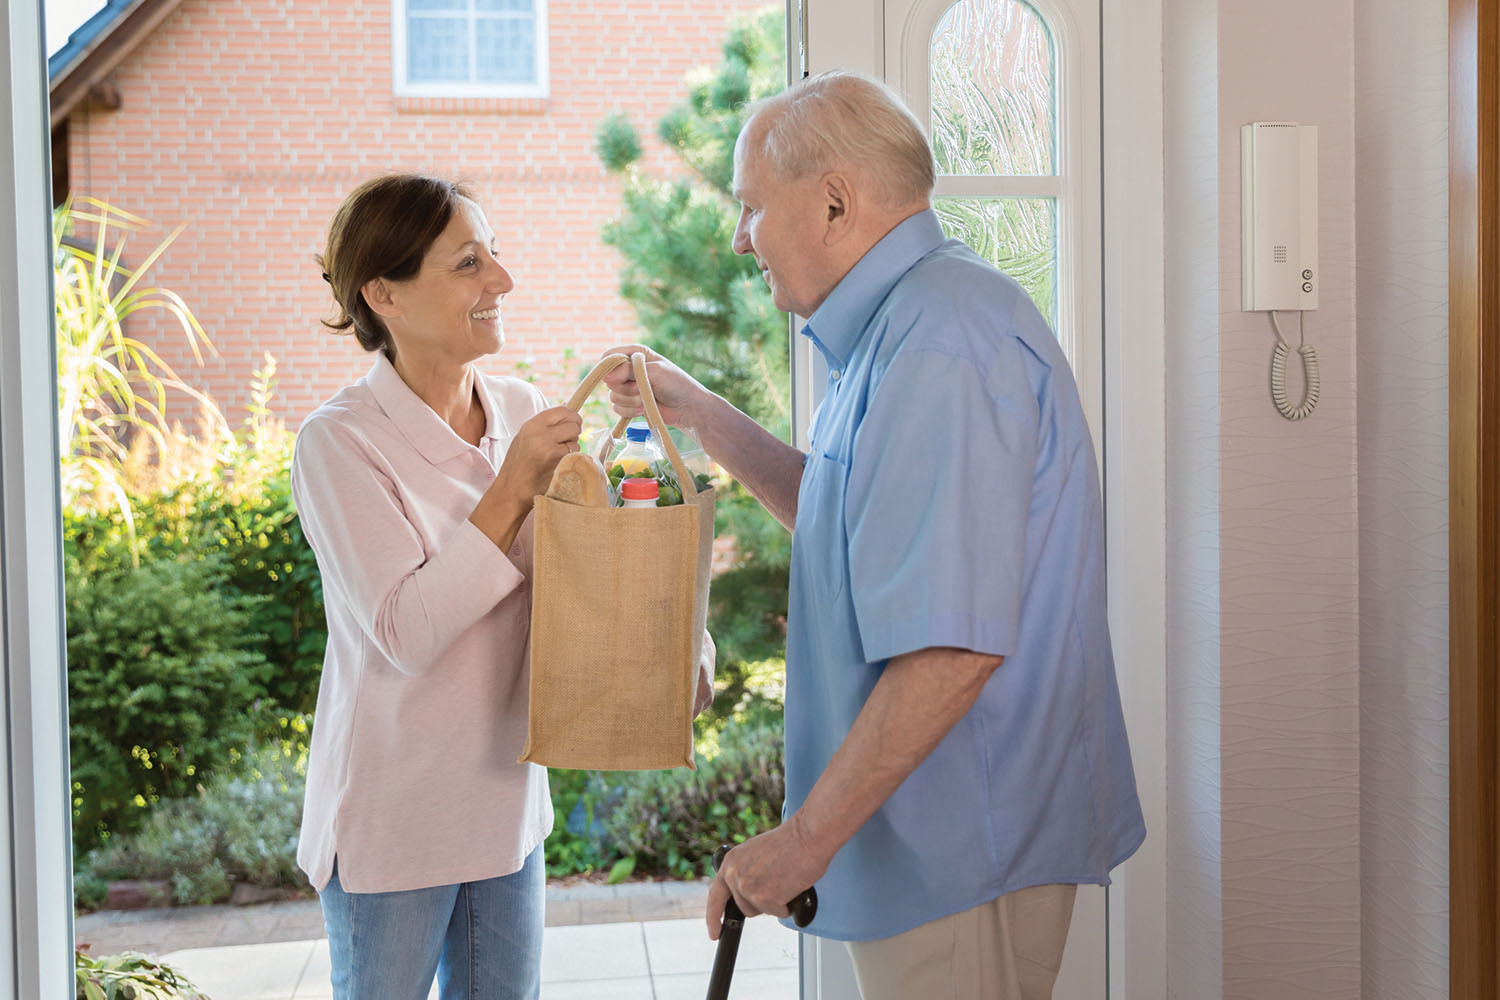 photo of a smiling woman handing a bag of groceries to a man on the front porch of his home, the man has a hearing aid visible in his ear and is using his other hand to lean on a cane